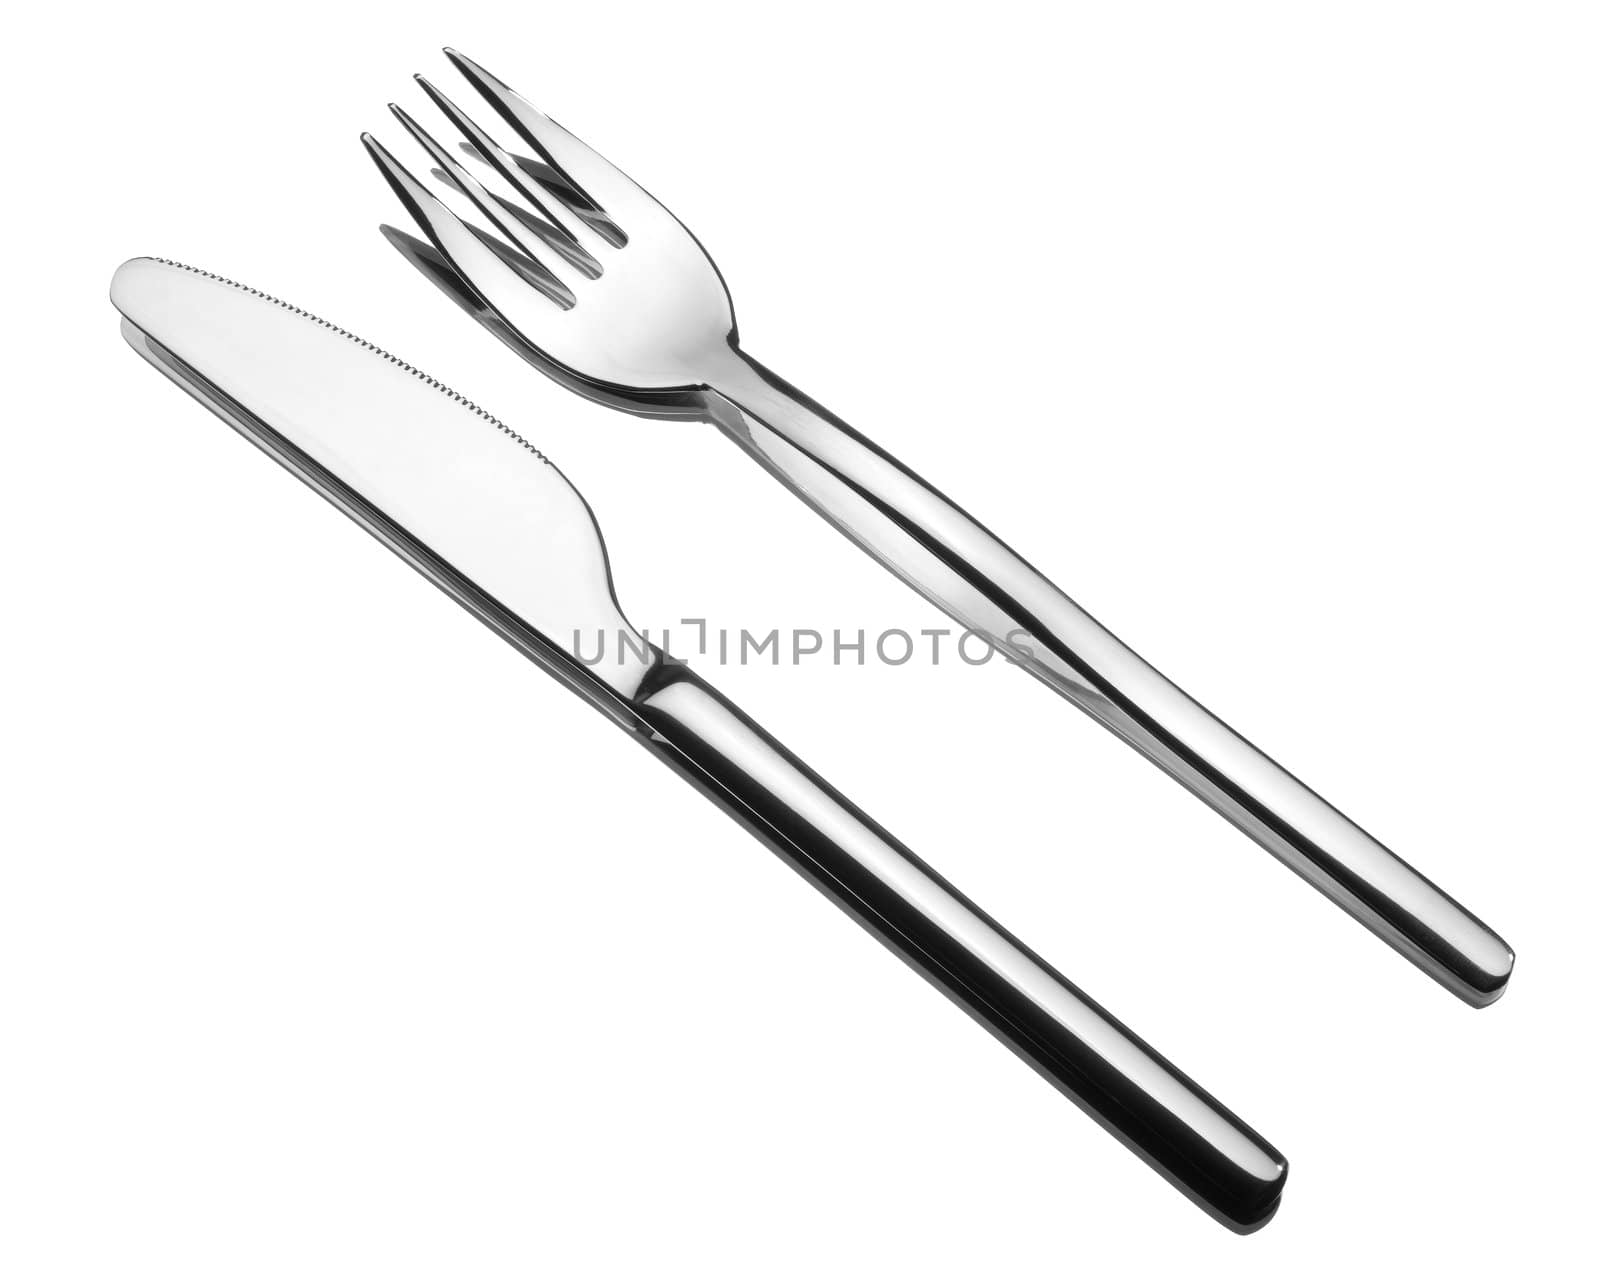 silverware on a mirror. Fork and knife. by pbombaert